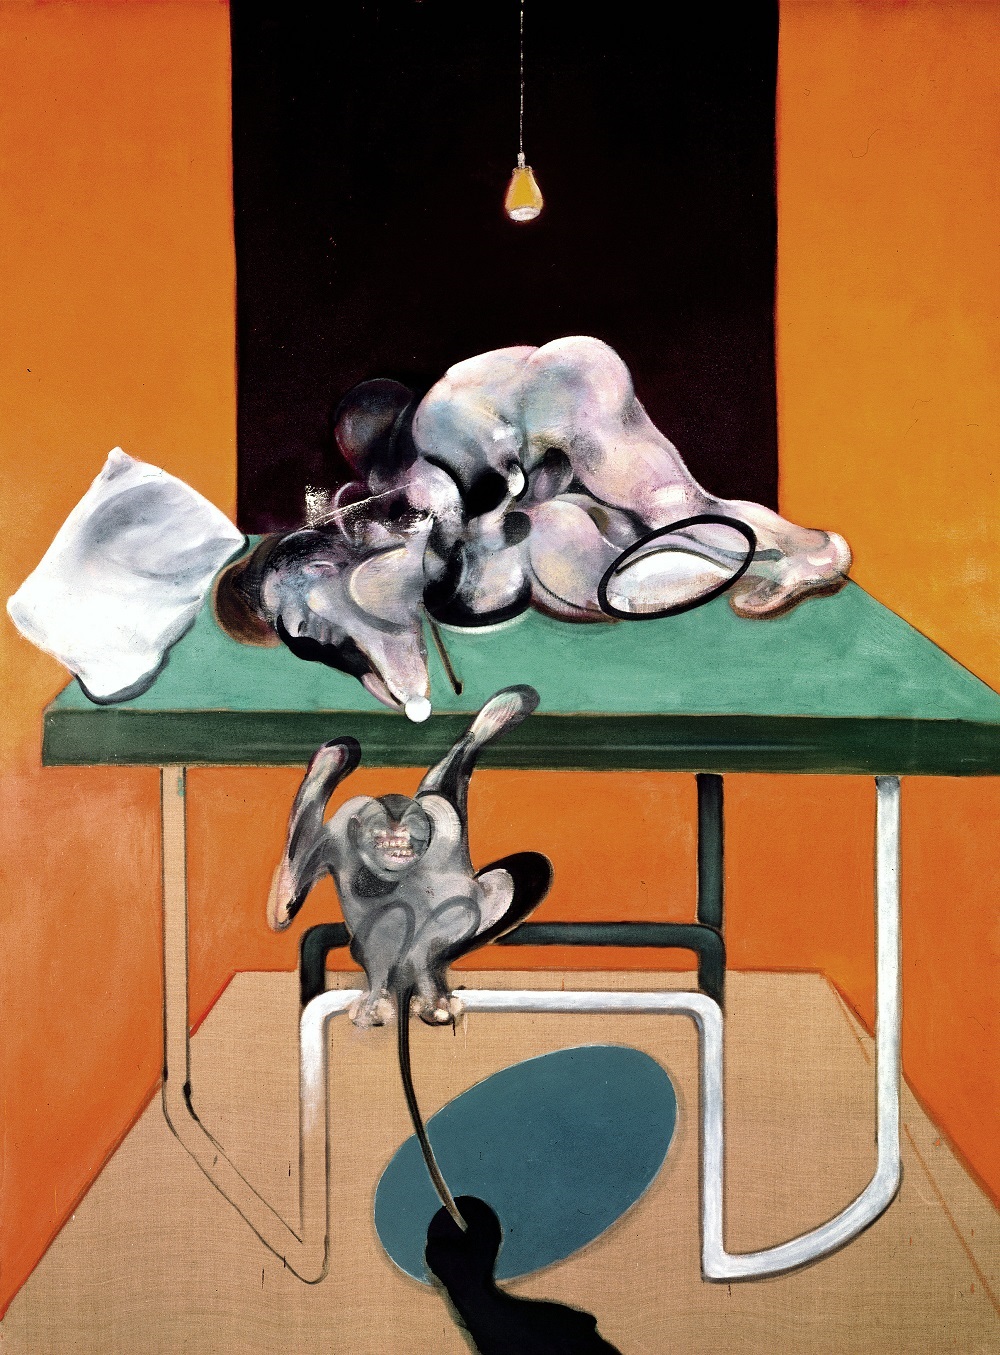 Francis Bacon Two Figures with a Monkey​, 1973 Oil on canvas 78 x 58 1/8 in 198 x 147.5 cm © The Estate of Francis Bacon. All rights reserved, DACS/Artimage 2019 Photo: Prudence Cuming Associates Ltd Courtesy Gagosian     